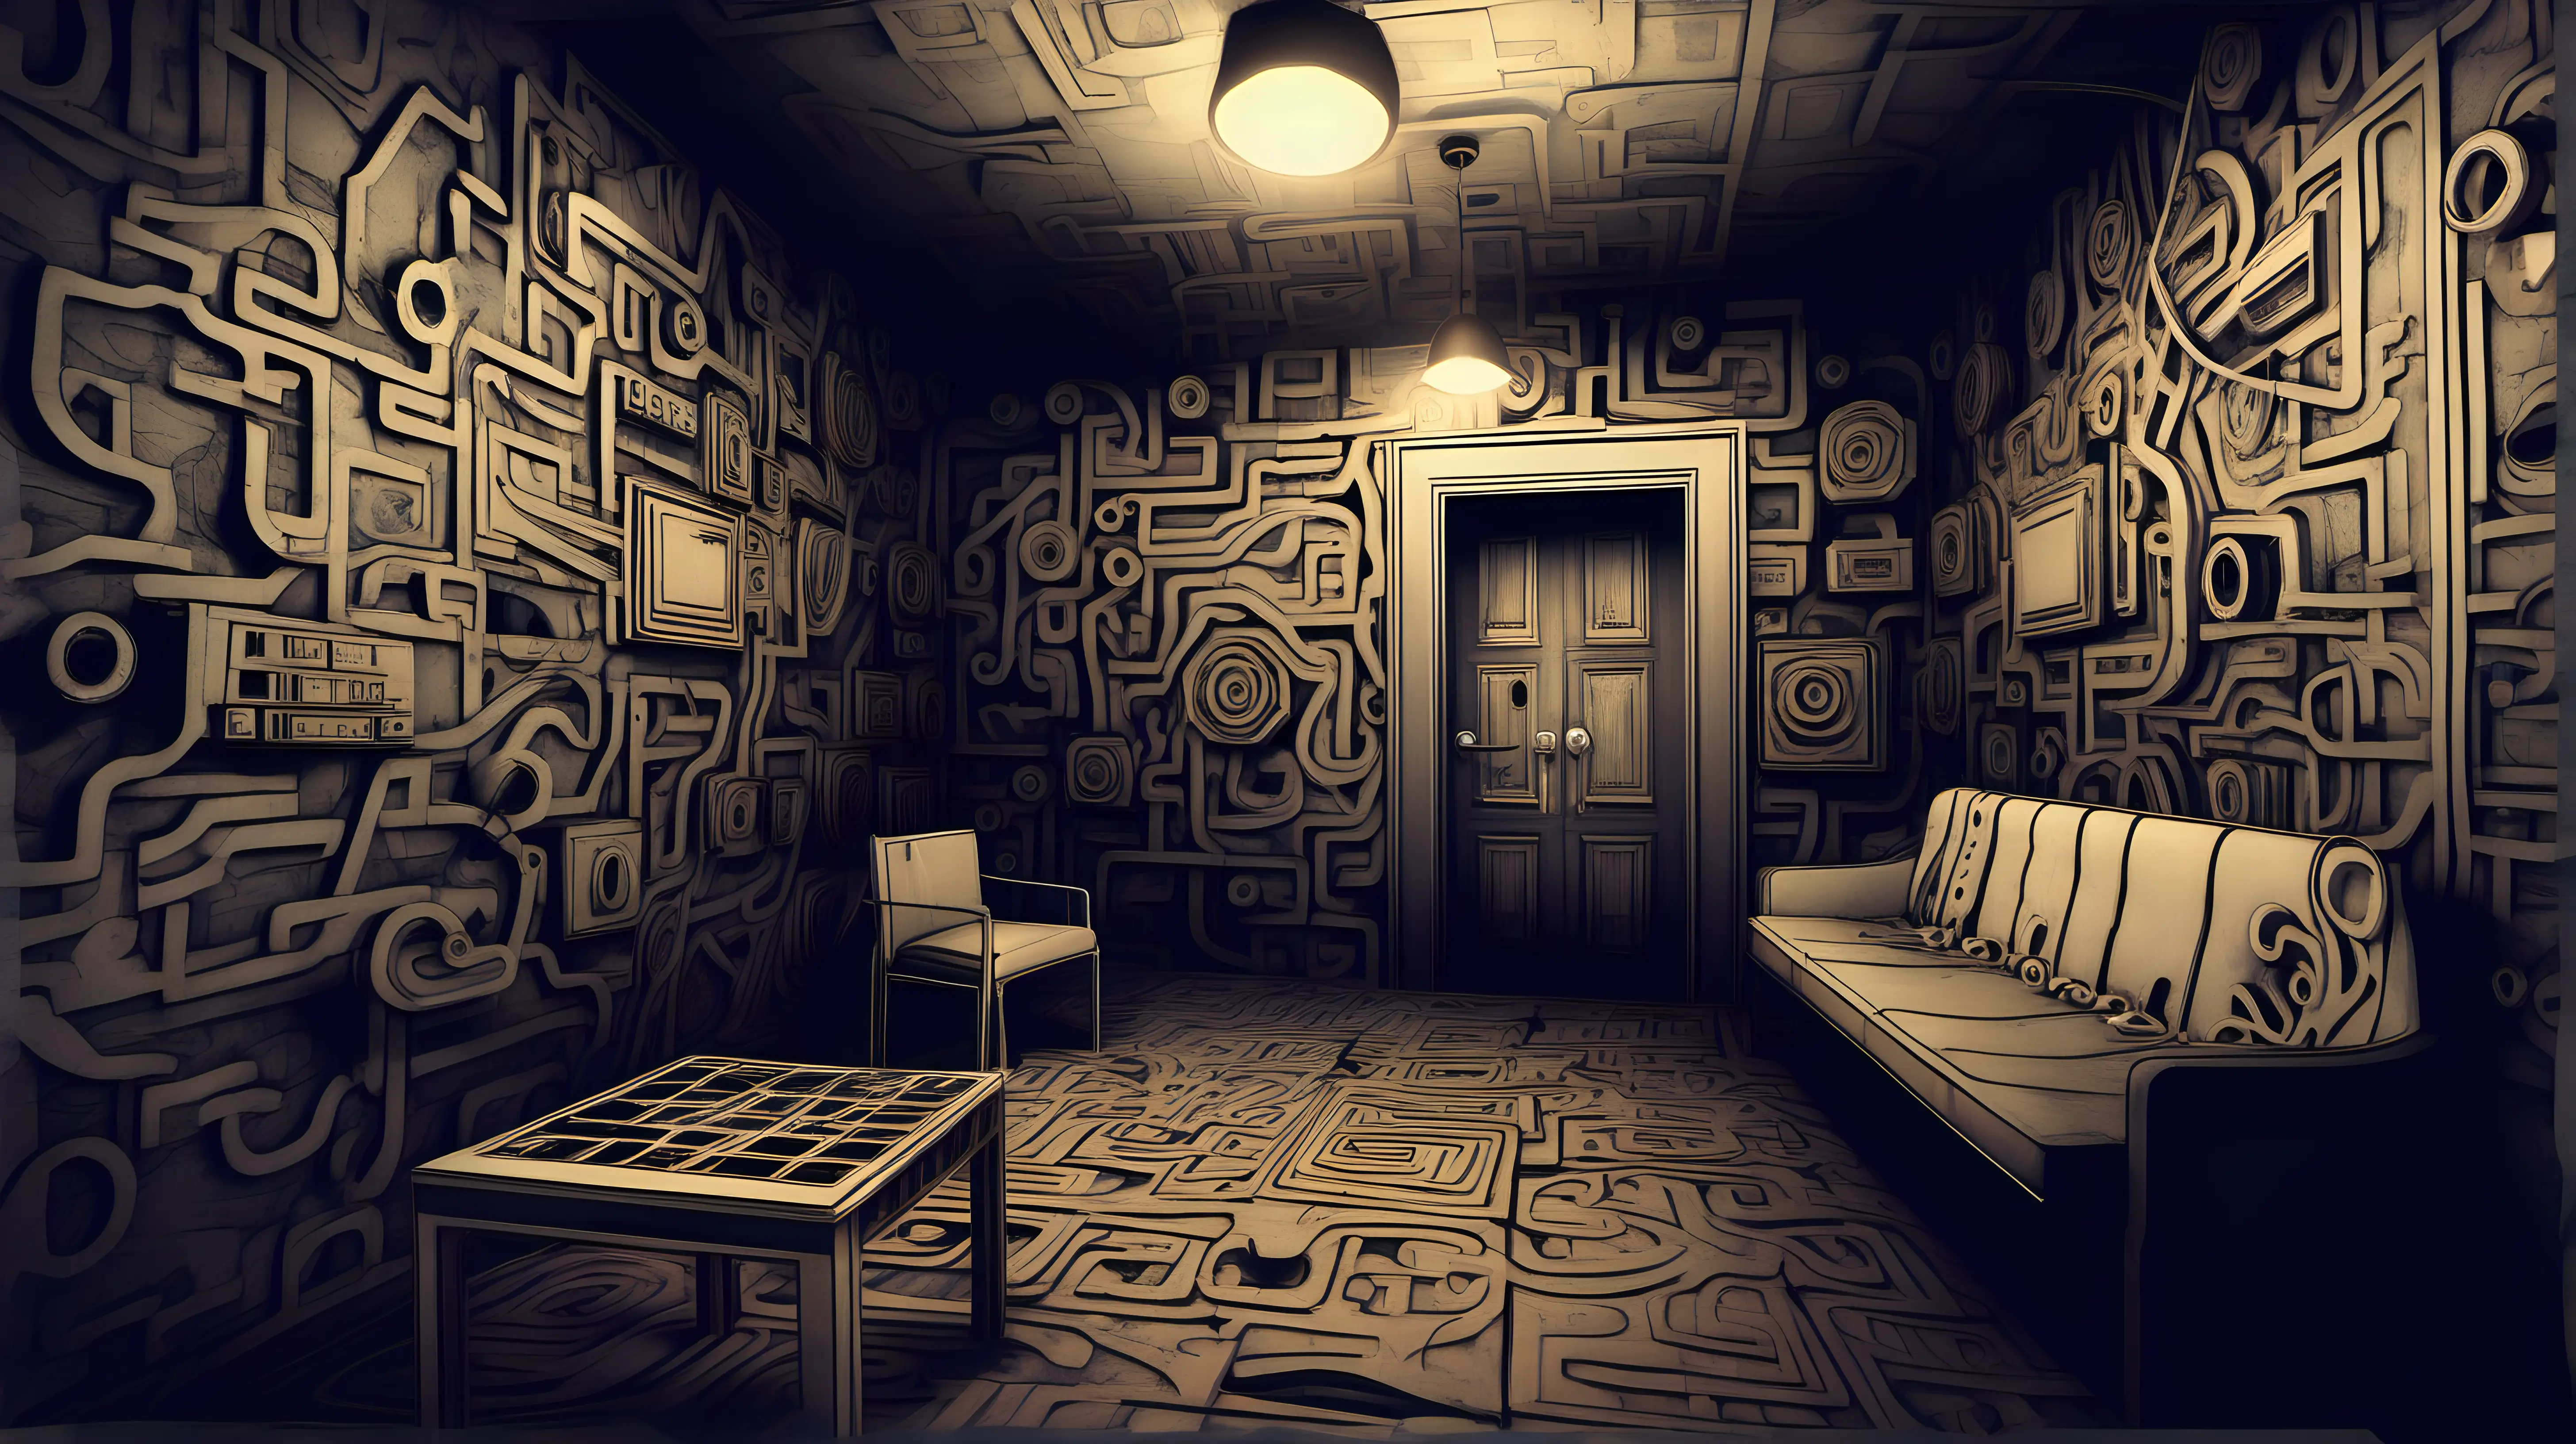 "Illustrate a VR escape room experience, where participants solve puzzles and navigate through surreal environments to unlock the next level of the digital challenge."